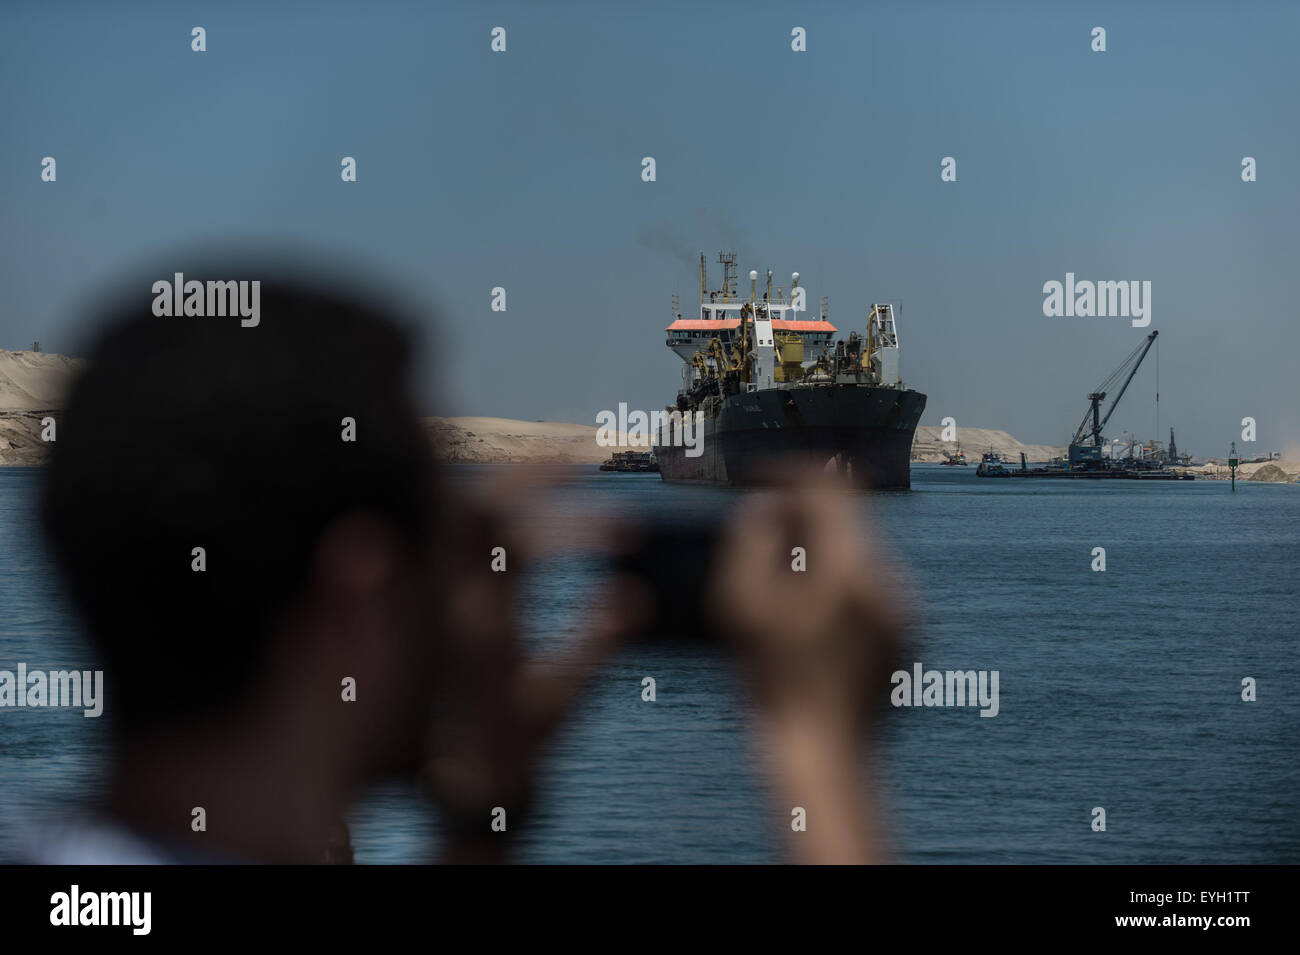 Ismailia, Egypt. 29th July, 2015. A man takes photos on the new Suez Canal in Ismailia, a port city in Egypt, on July 29, 2015. The dredging work of Egypt's 'New Suez Canal' has been completed and the waterway is ready as well as safe for huge ship navigation, Mohab Memish, head of the Suez Canal Authority (SCA), told reporters in a press conference Wednesday. © Pan Chaoyue/Xinhua/Alamy Live News Stock Photo